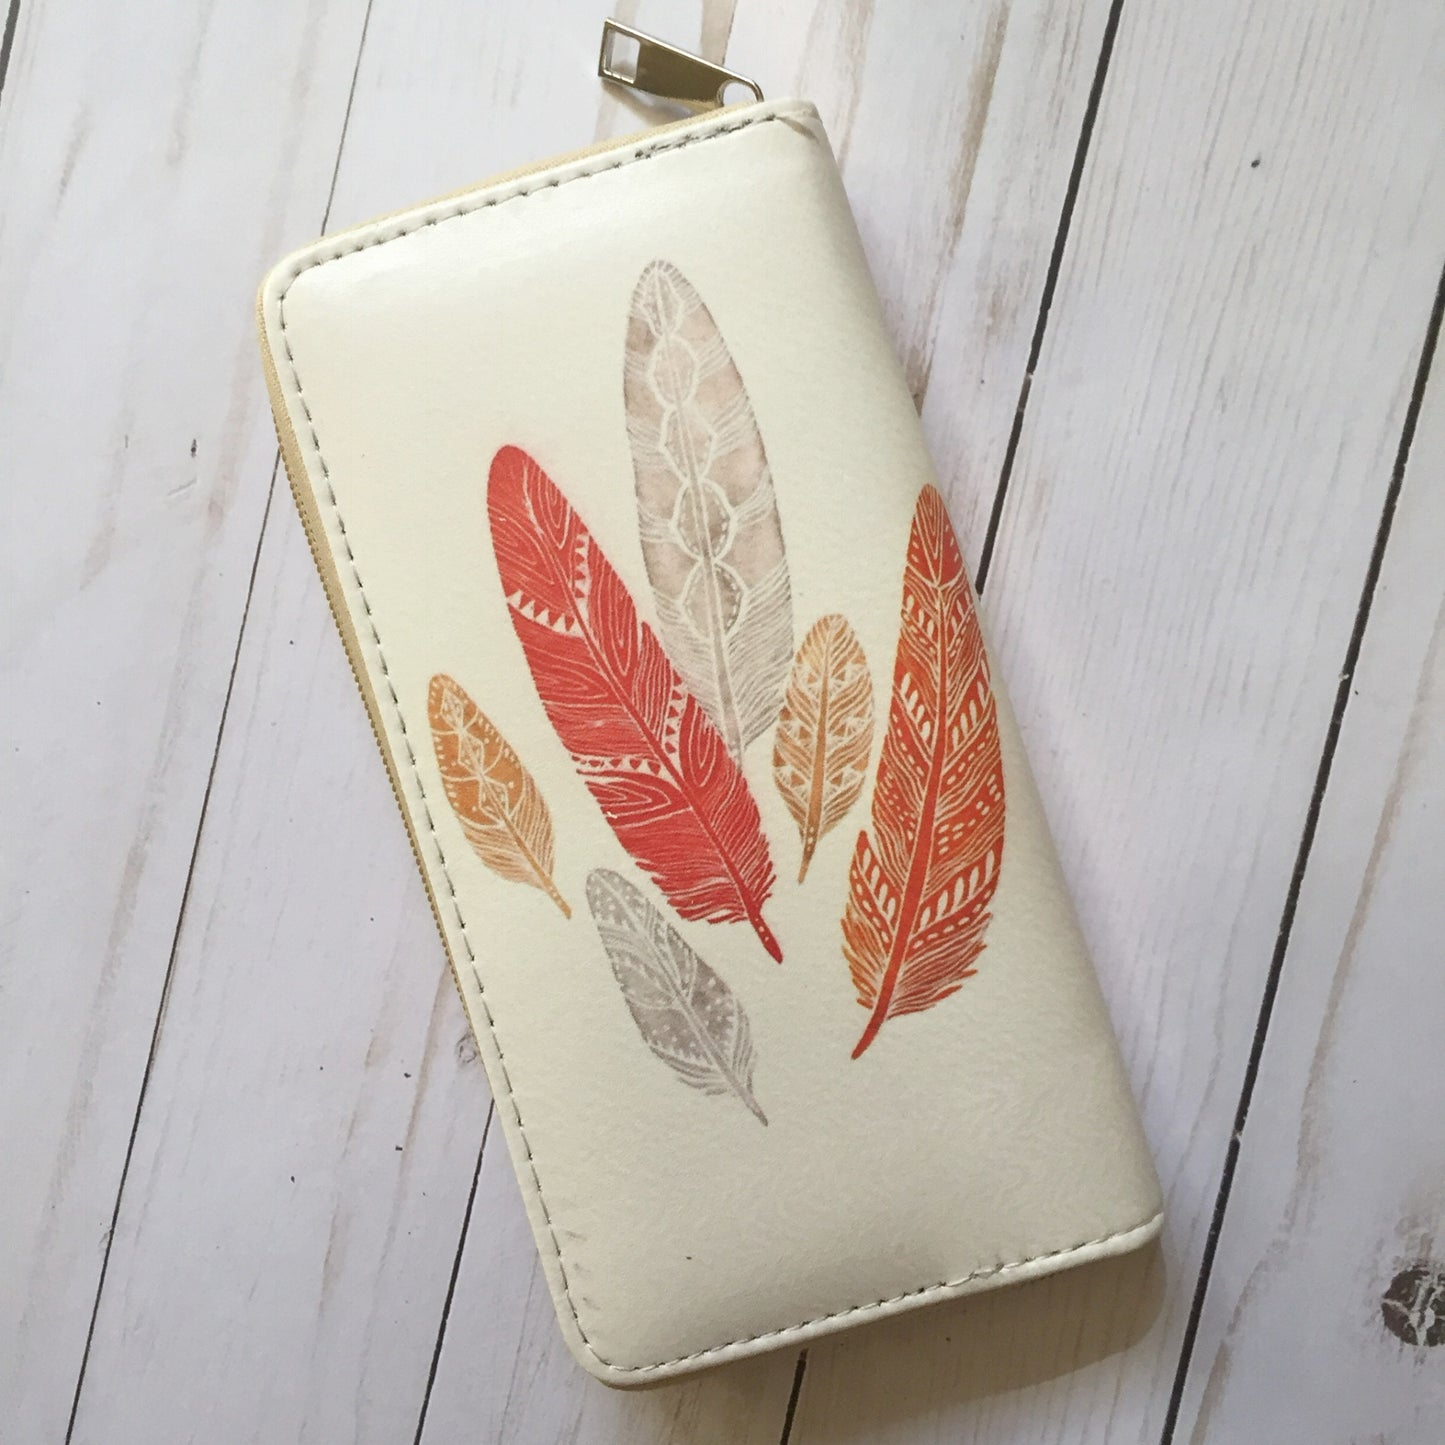 Feather Wallet - Coral Orange, Tan and Gray